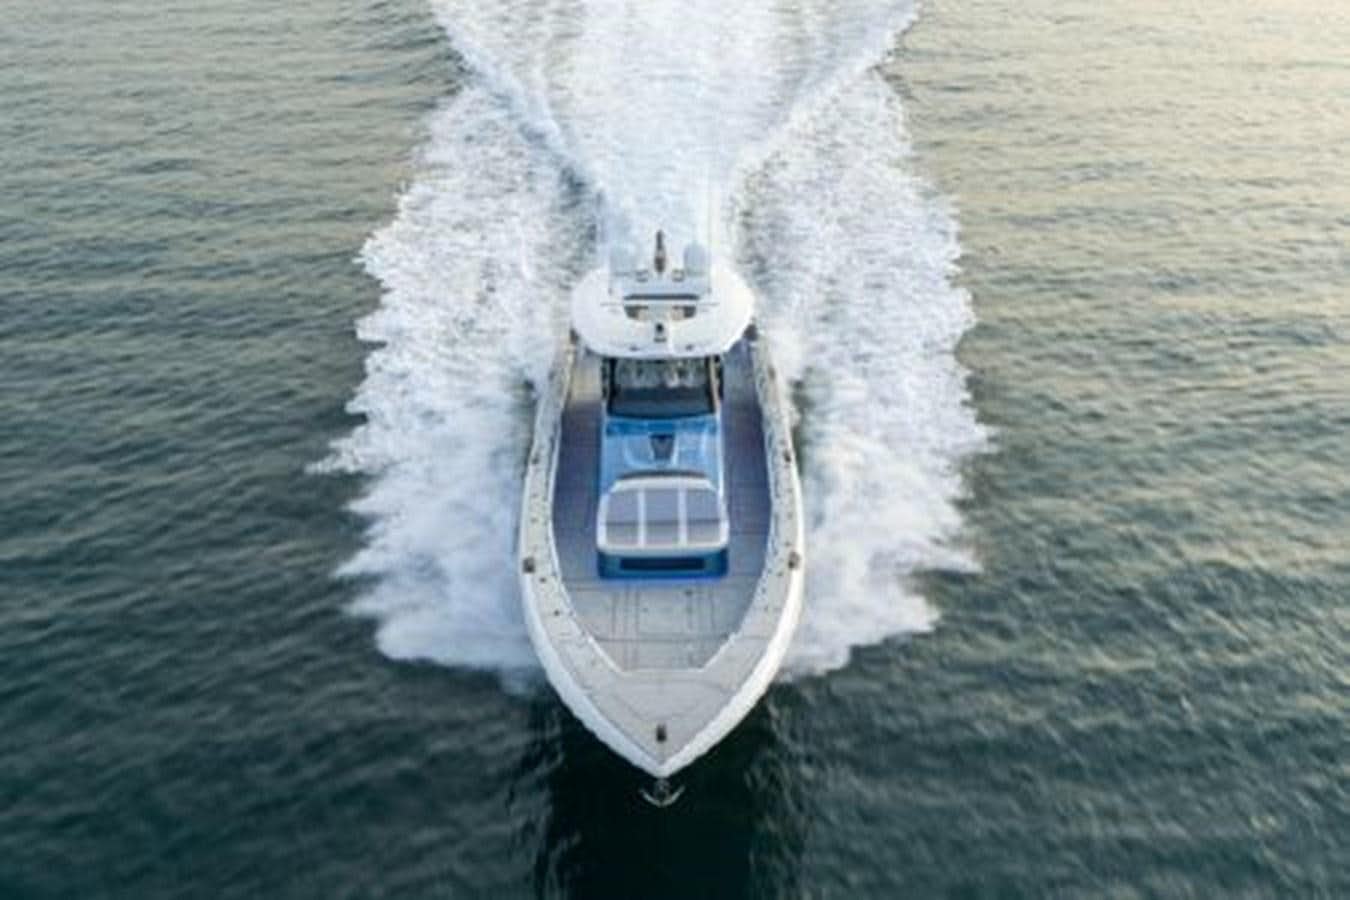 THE GREAT WHITE Yacht for Sale, 63' (19.2m) 2022 CUSTOM